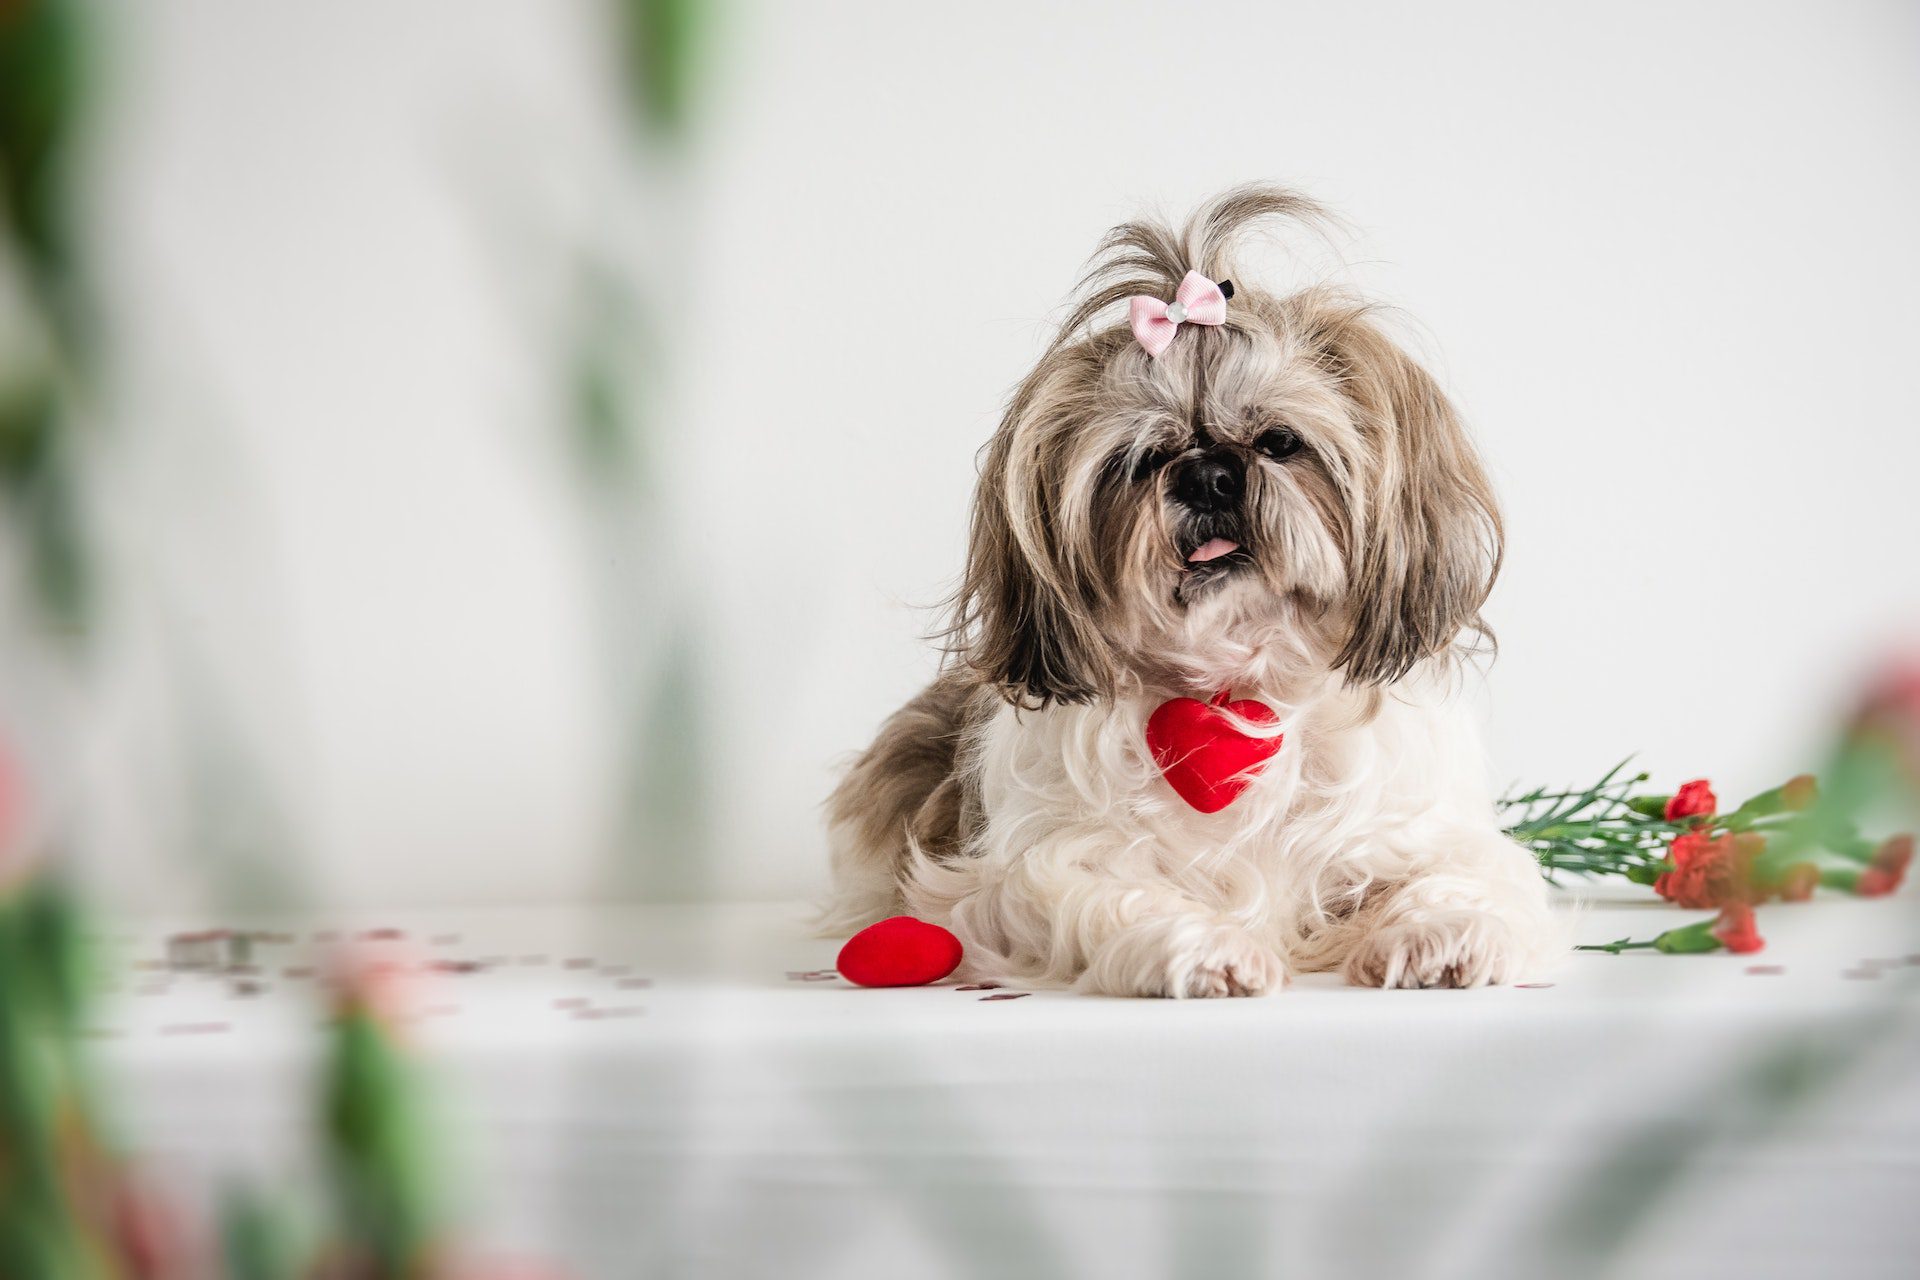 Are Imperial Shih Tzus healthy?